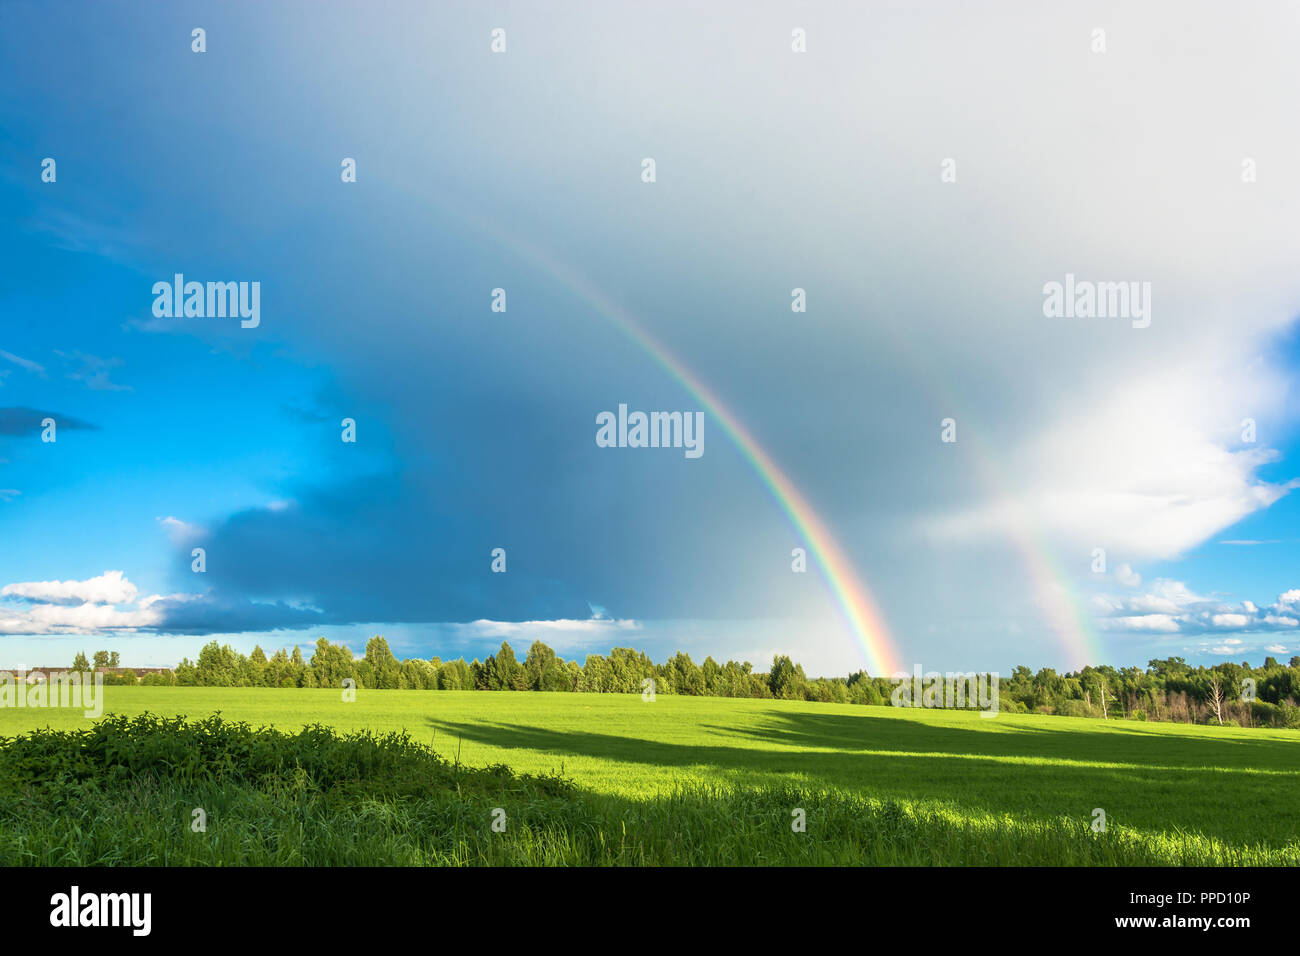 Bright multi-colored rainbow over the green field on the background of a large cloud. Stock Photo